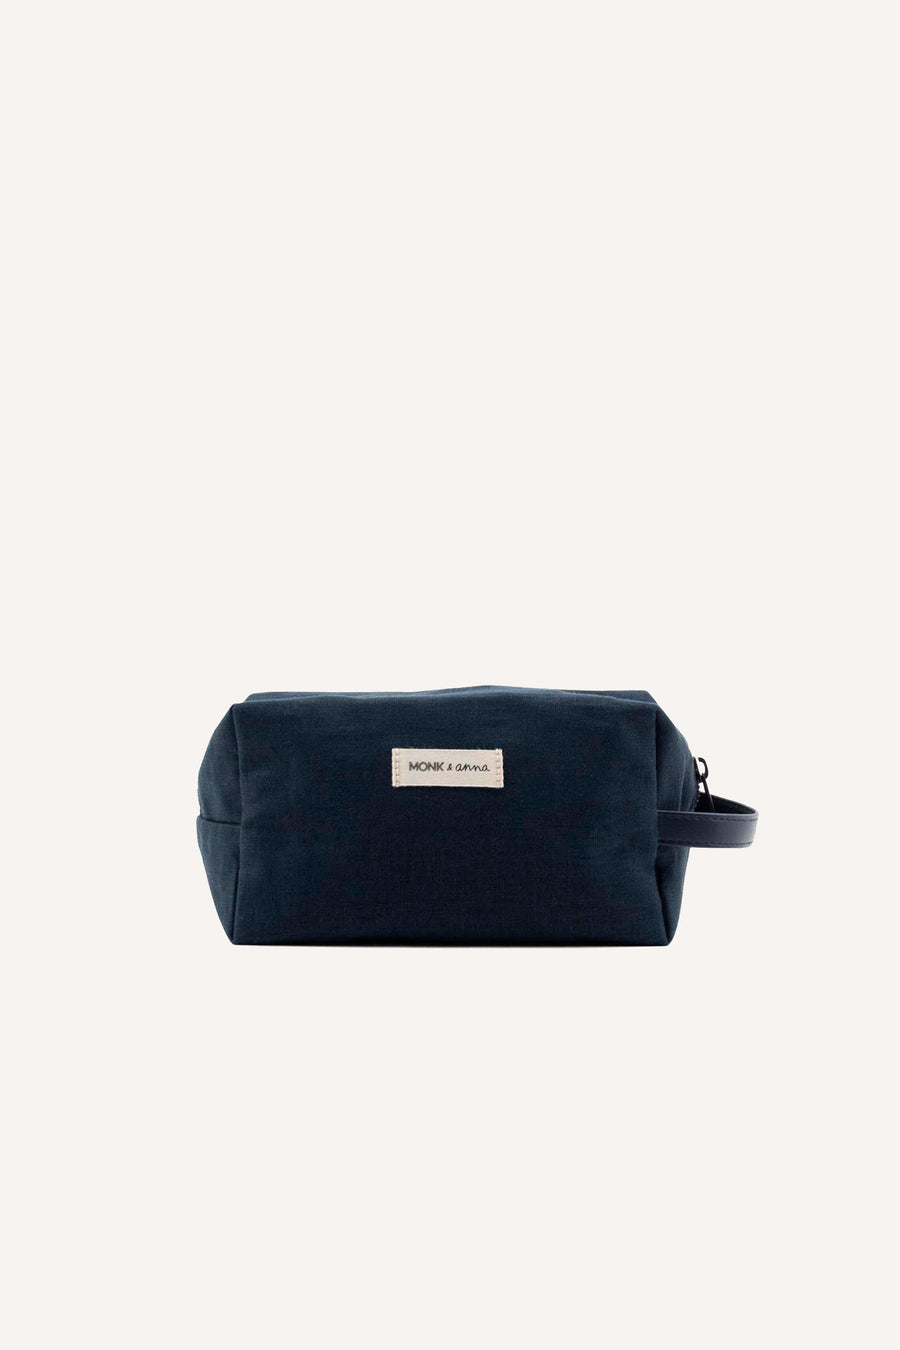 Toiletry bag midnight blue